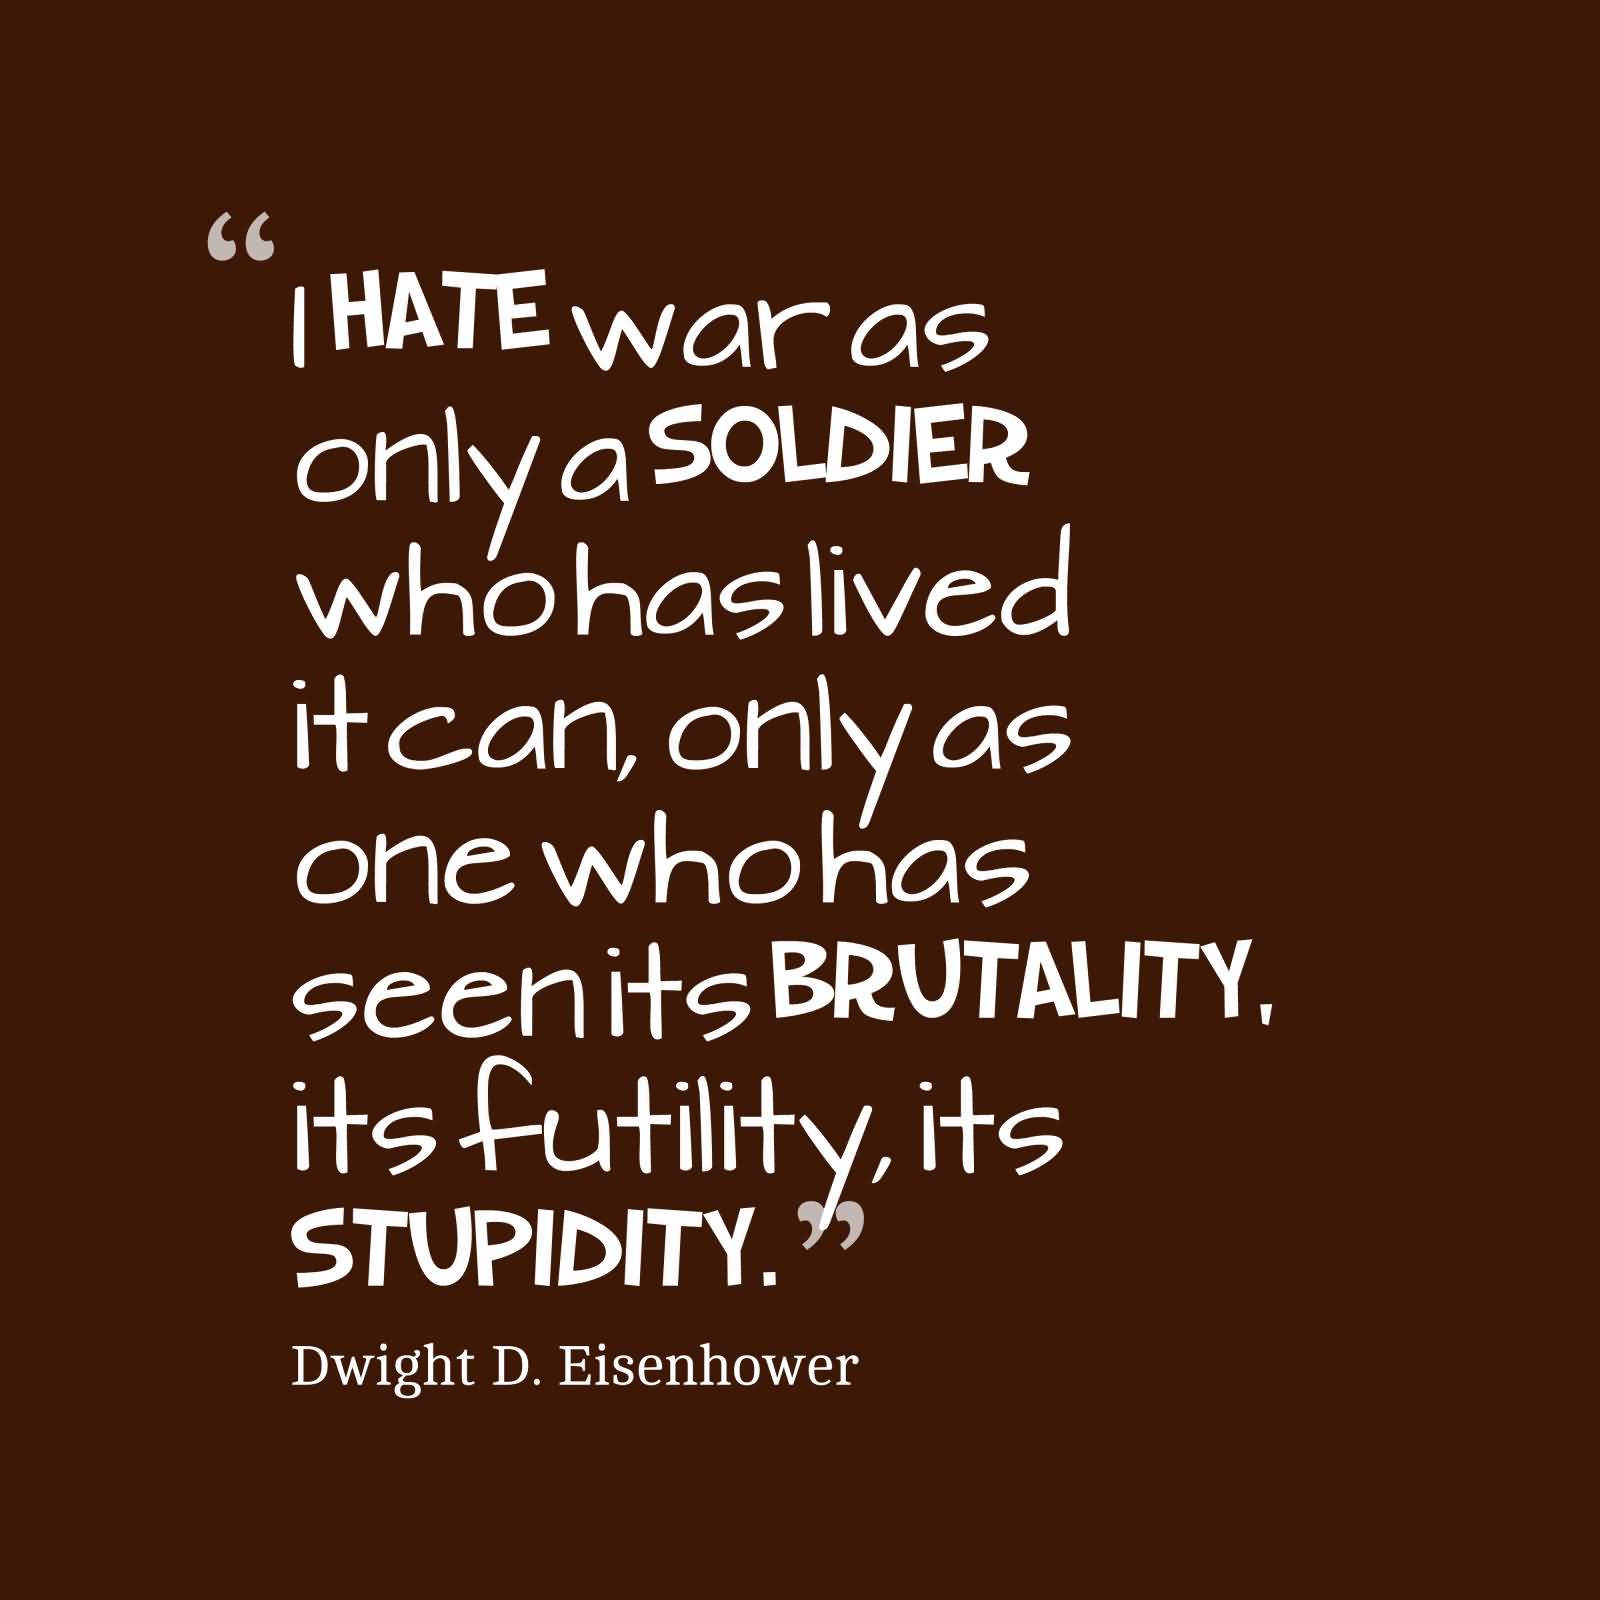 I hate war as only a soldier who has lived it can, only as one who has seen its brutality, its futility, its stupidity.